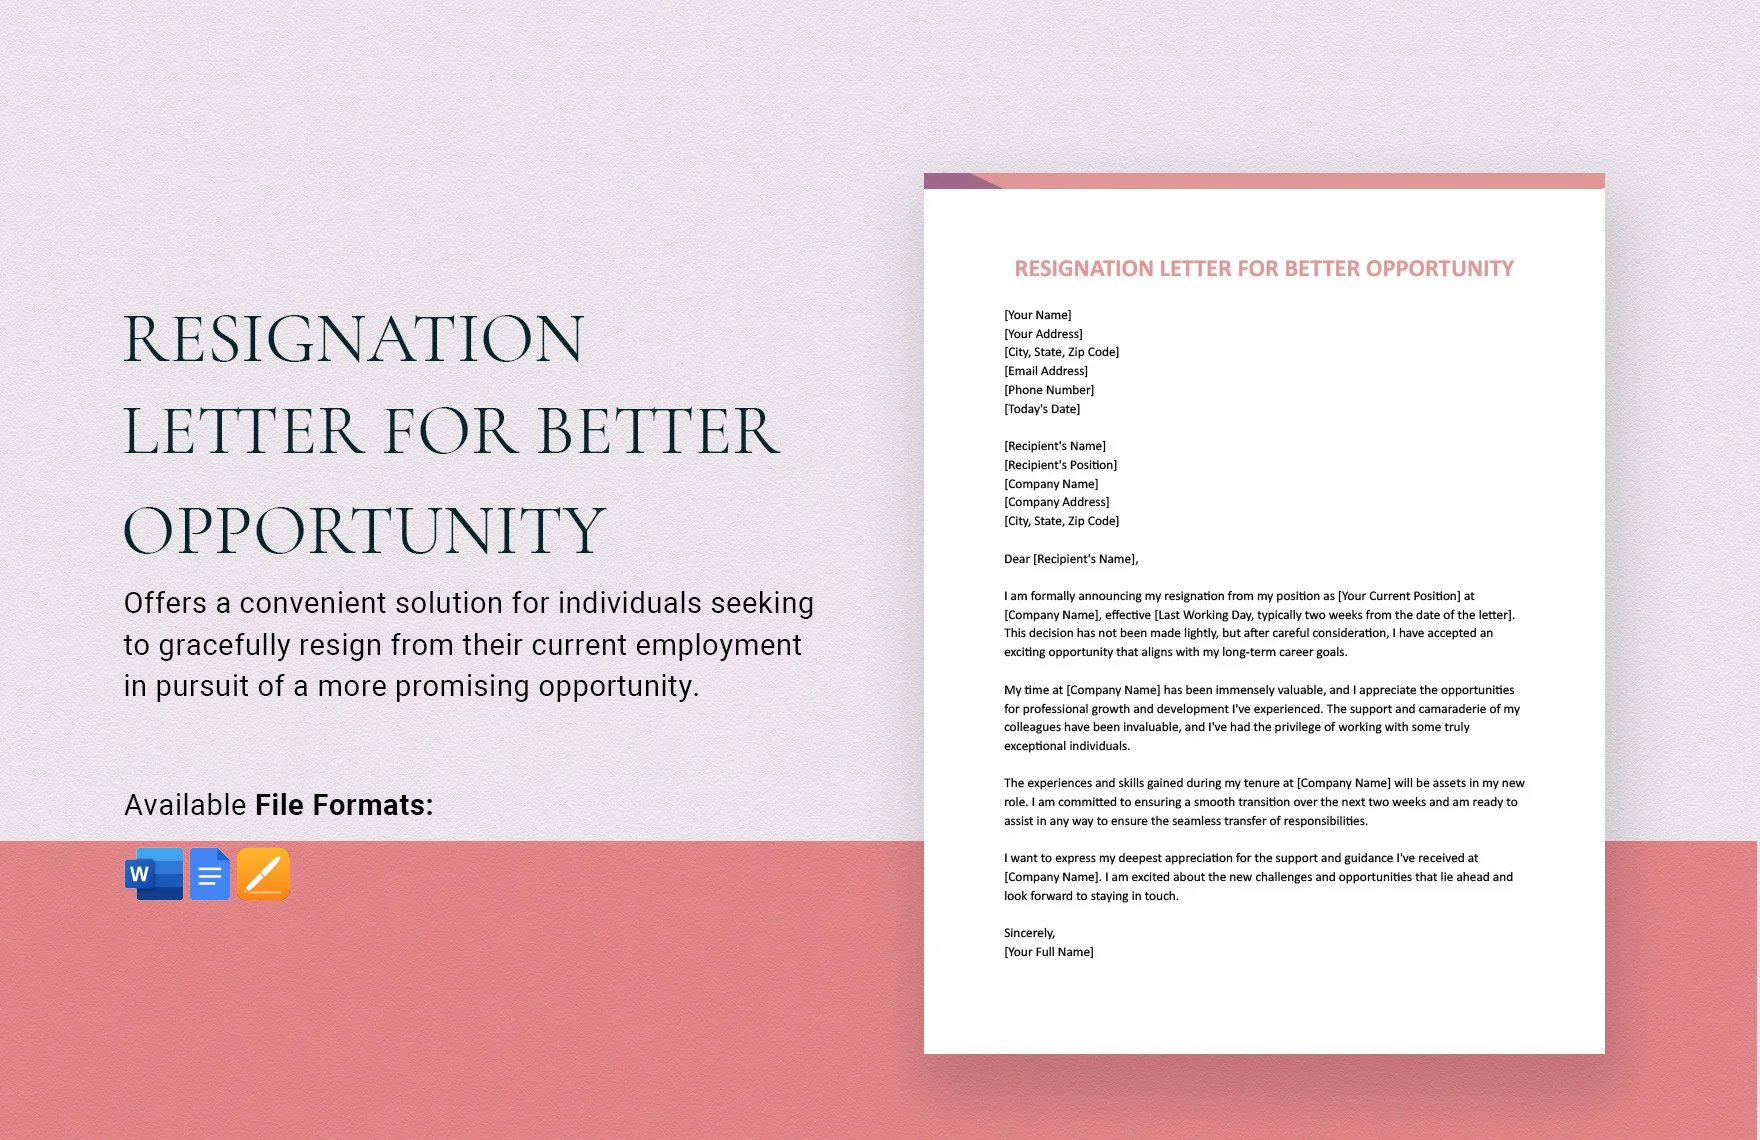 Free Resignation Letter For Better Opportunity in Word, Google Docs, Apple Pages